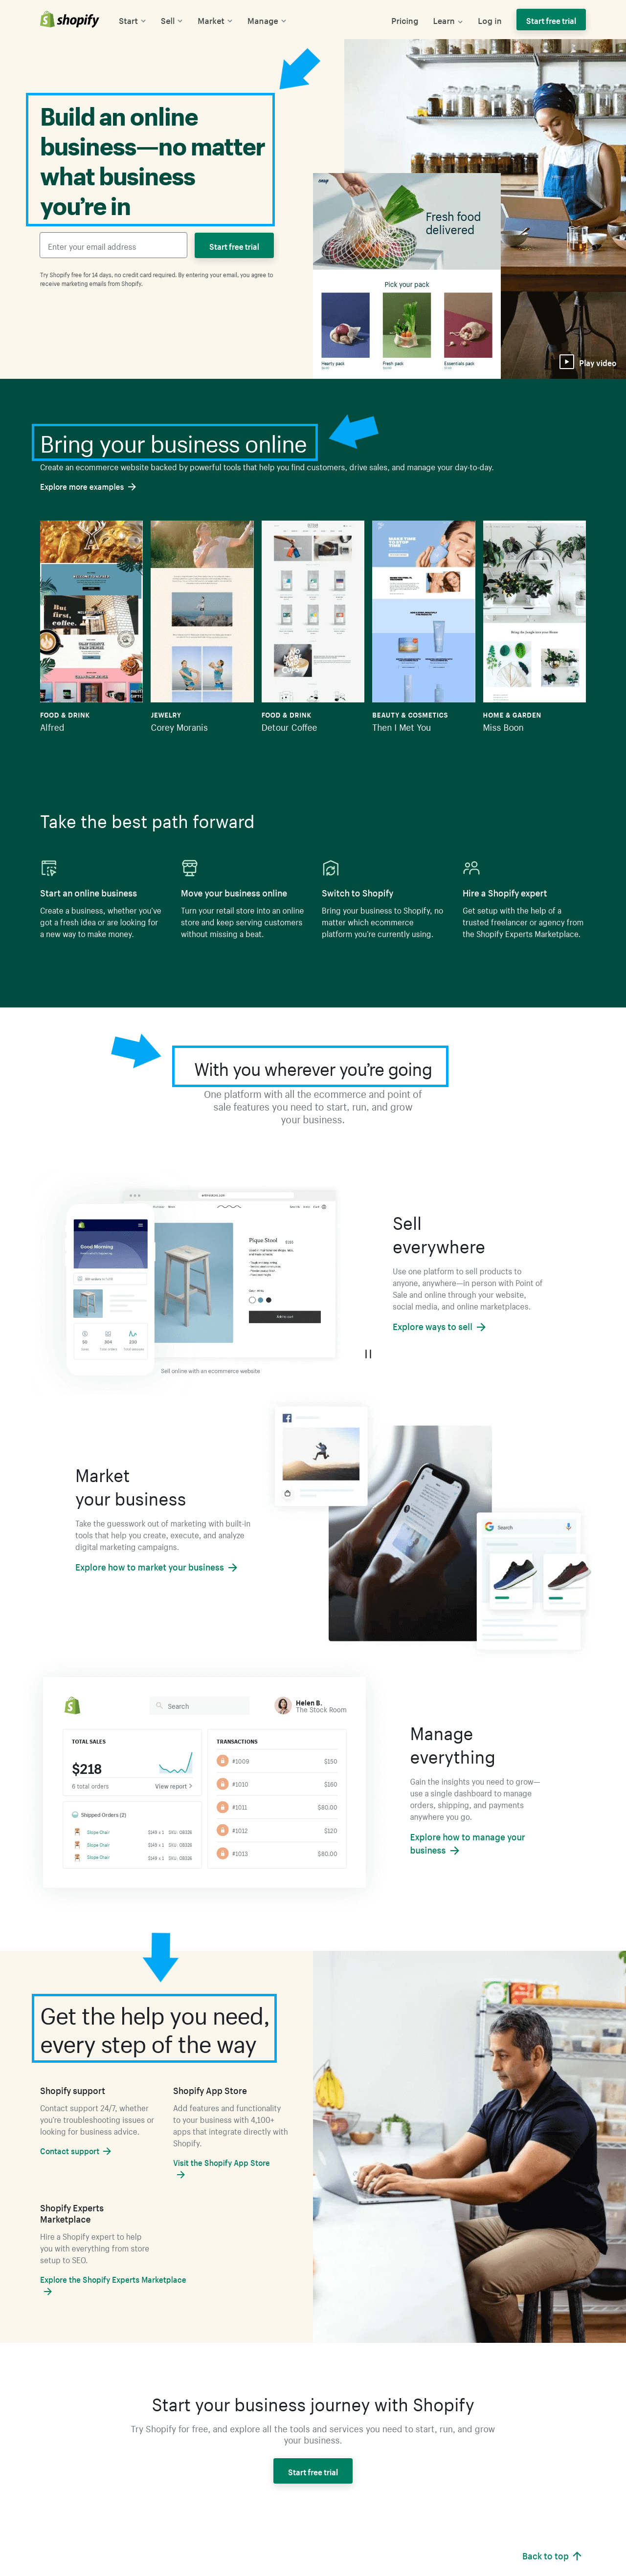 Landing page example - shopify